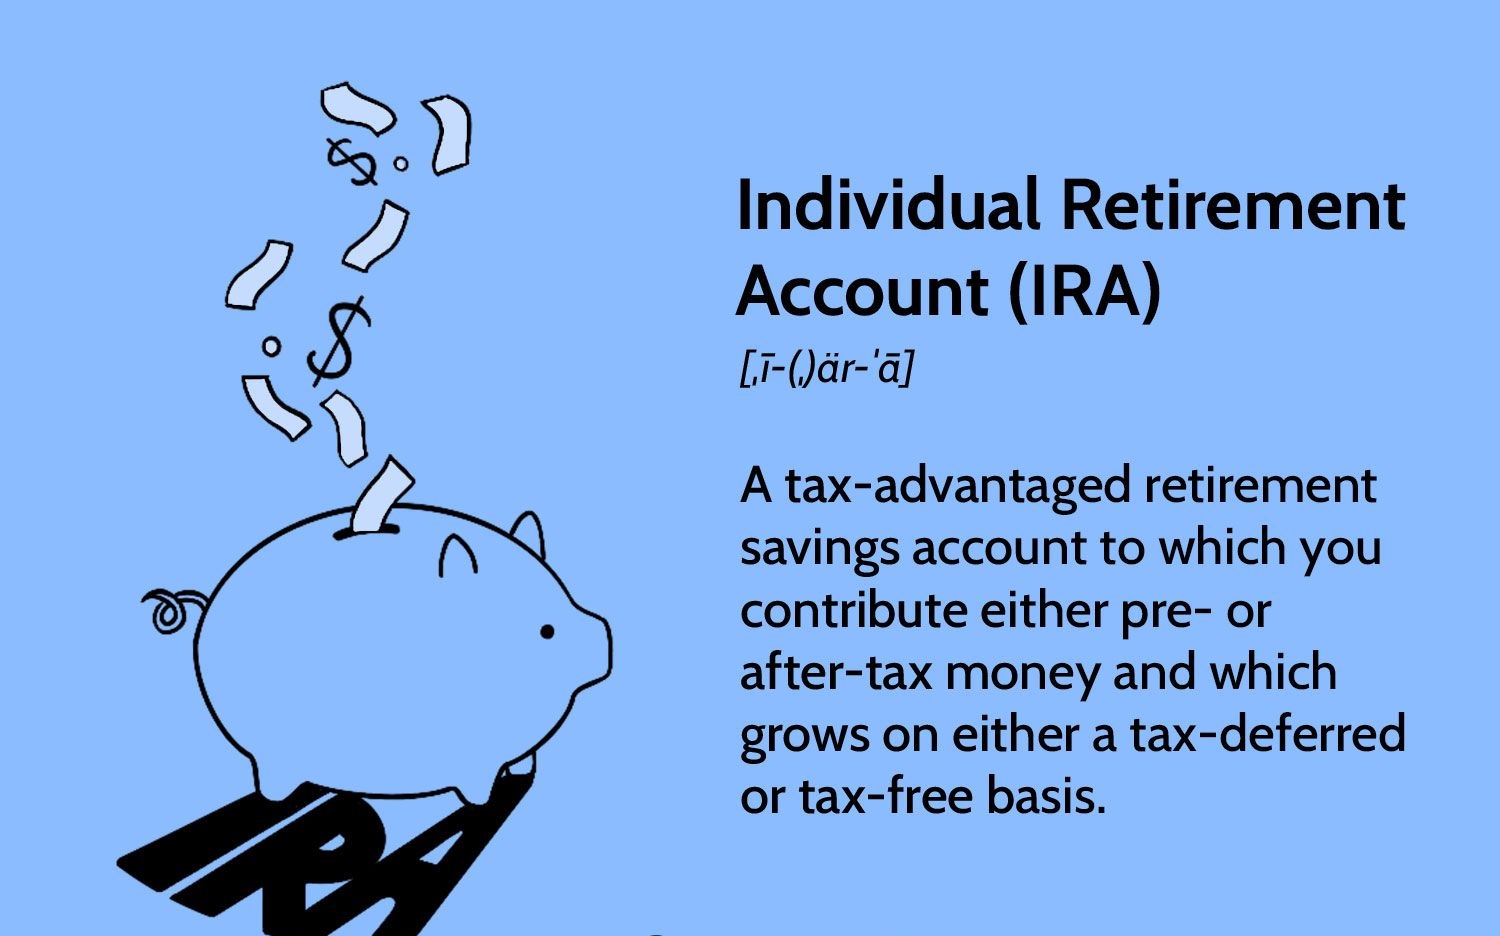 What Type Of Investments Are Not Allowed In An IRA